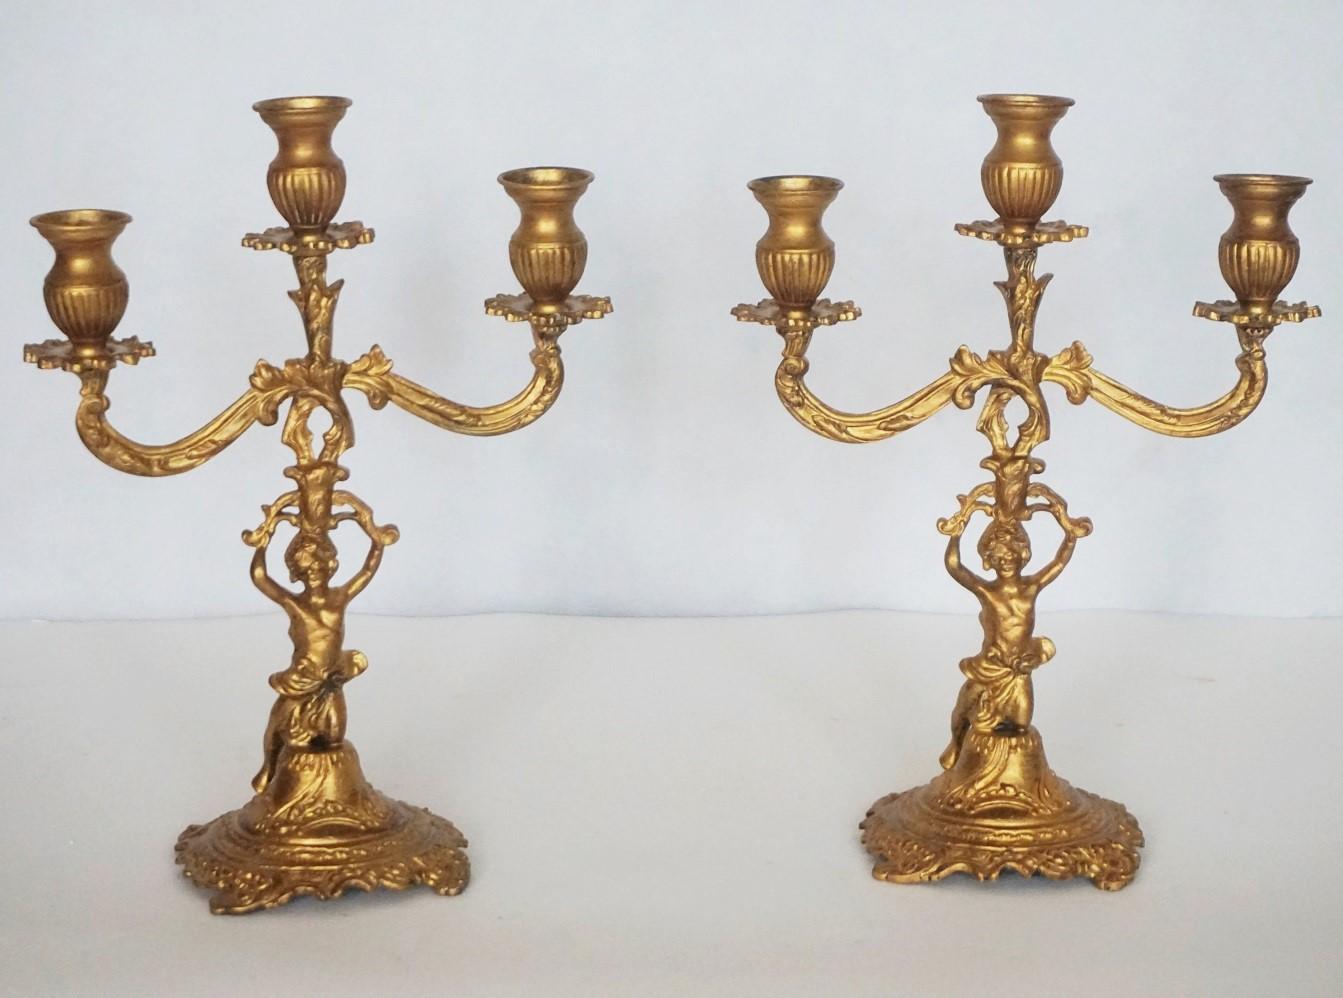 A pair of gilt bronze three-light candelabra with kneeling putto holding the candleholders raised on richly elaborate base, France, late 19th century.
Measures:
Height 12.50 in / 31.5 cm
Width 9.50 in / 24 cm.



   